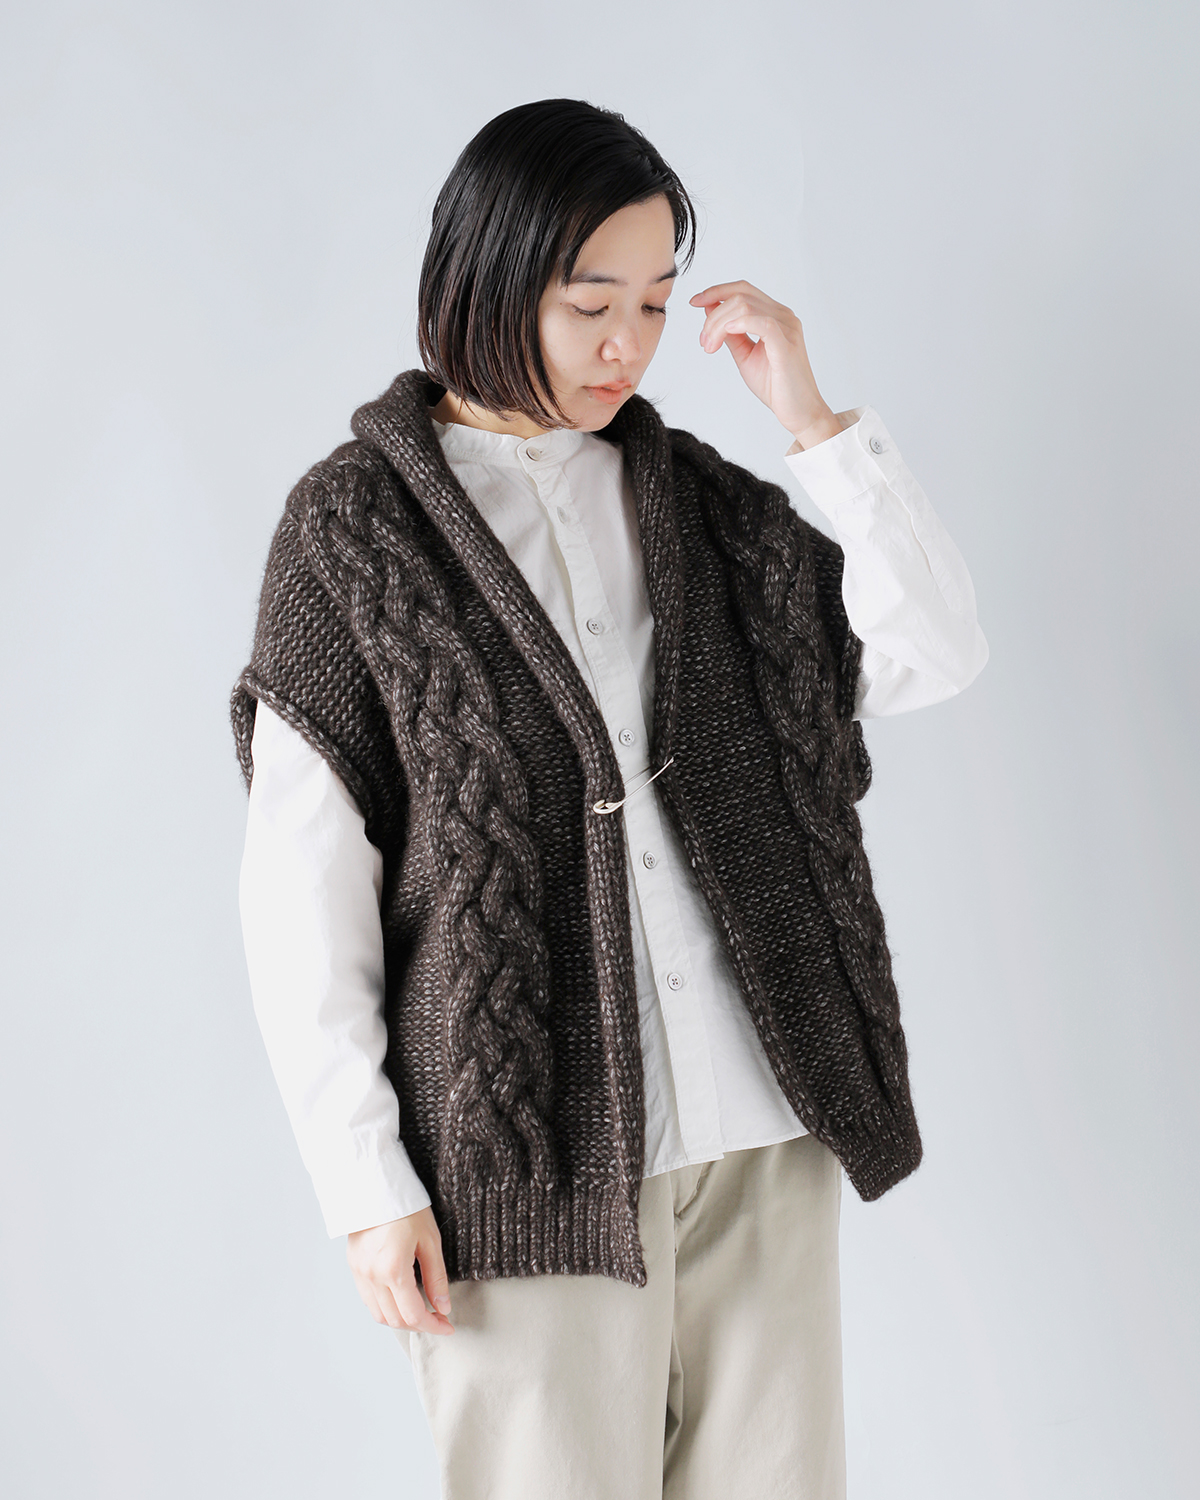 maison de soil(] h \C)3GG A st jbg xXg g3GG ARAN VEST WITH PINh cnmds2351